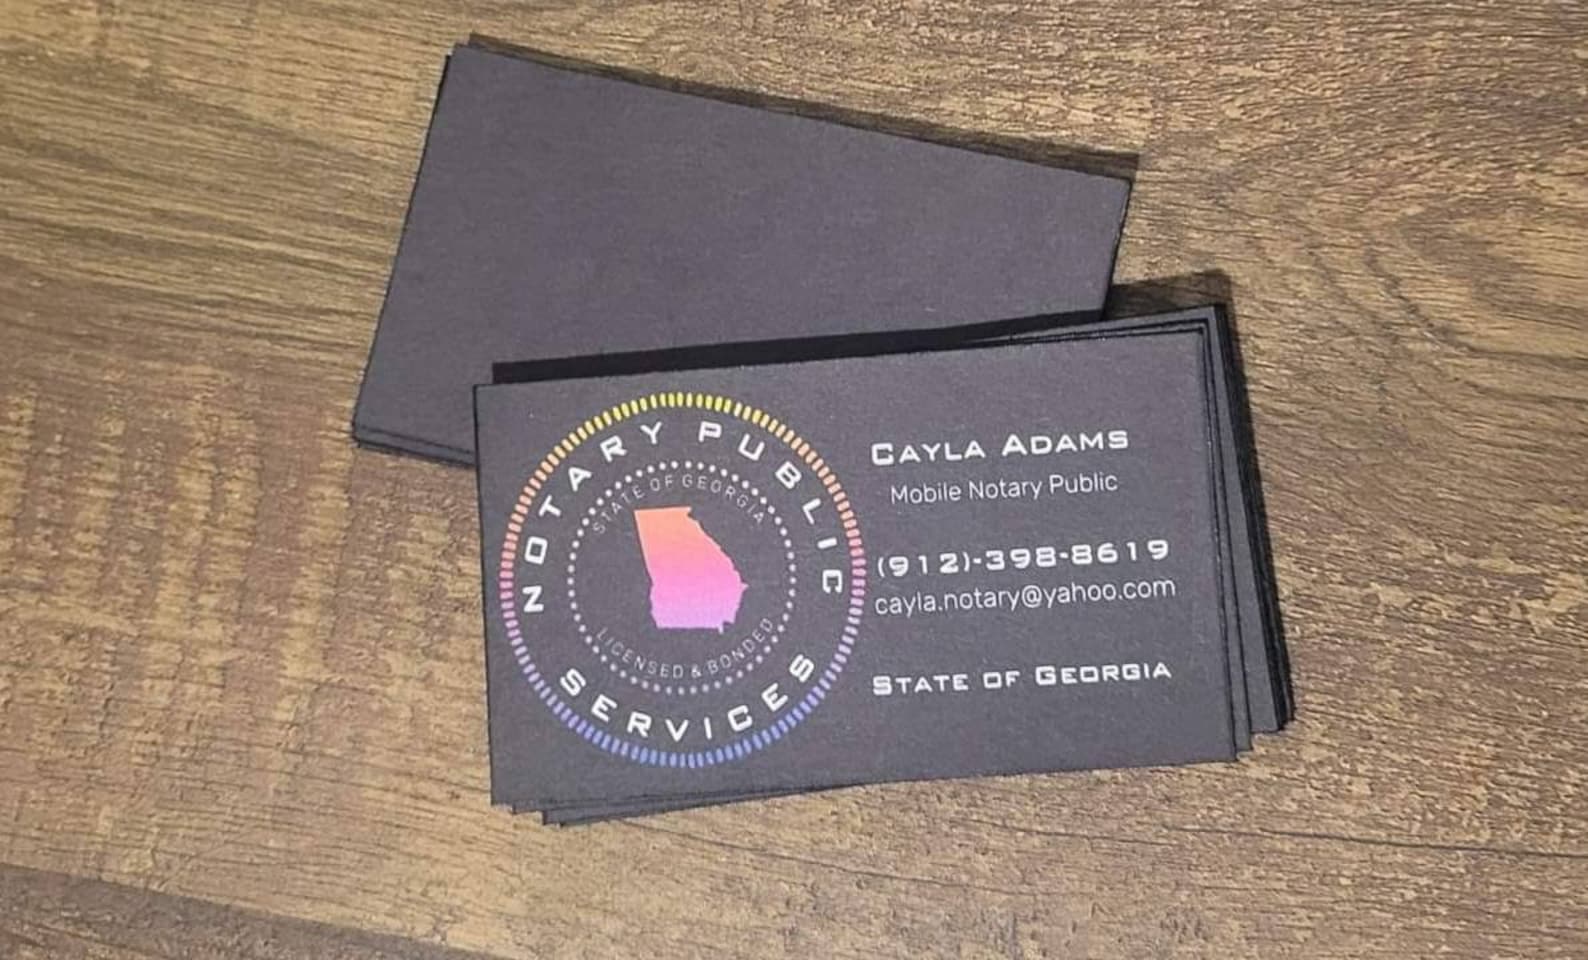 2 5 x 3 5 business cards 1